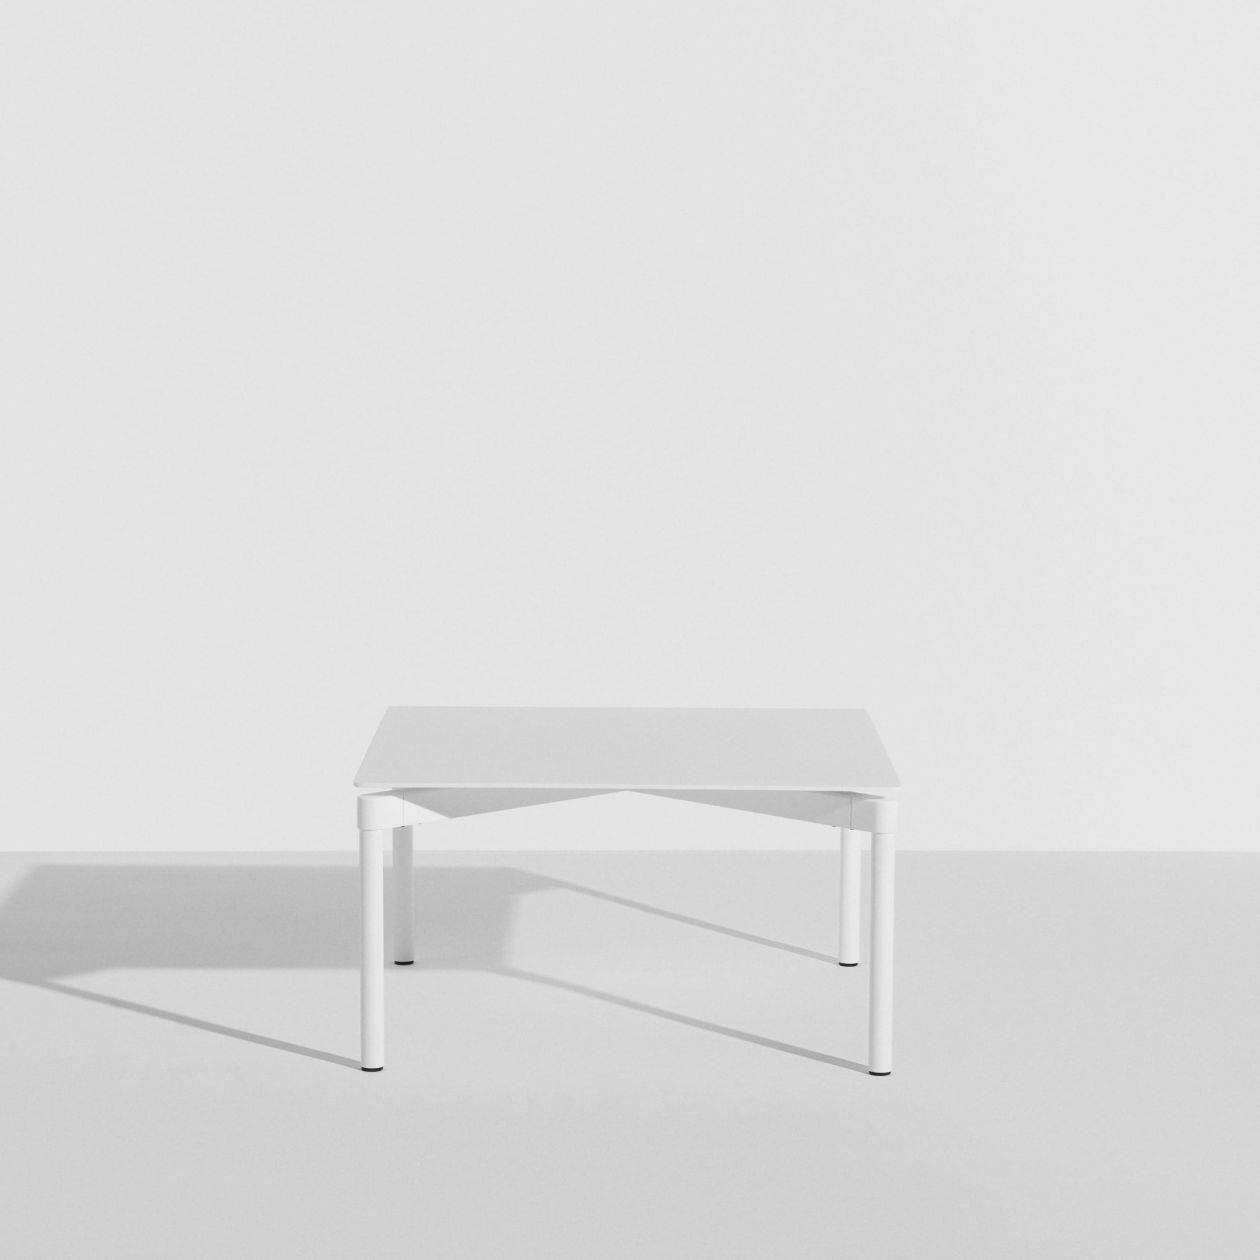 Fromme Coffee Table - White